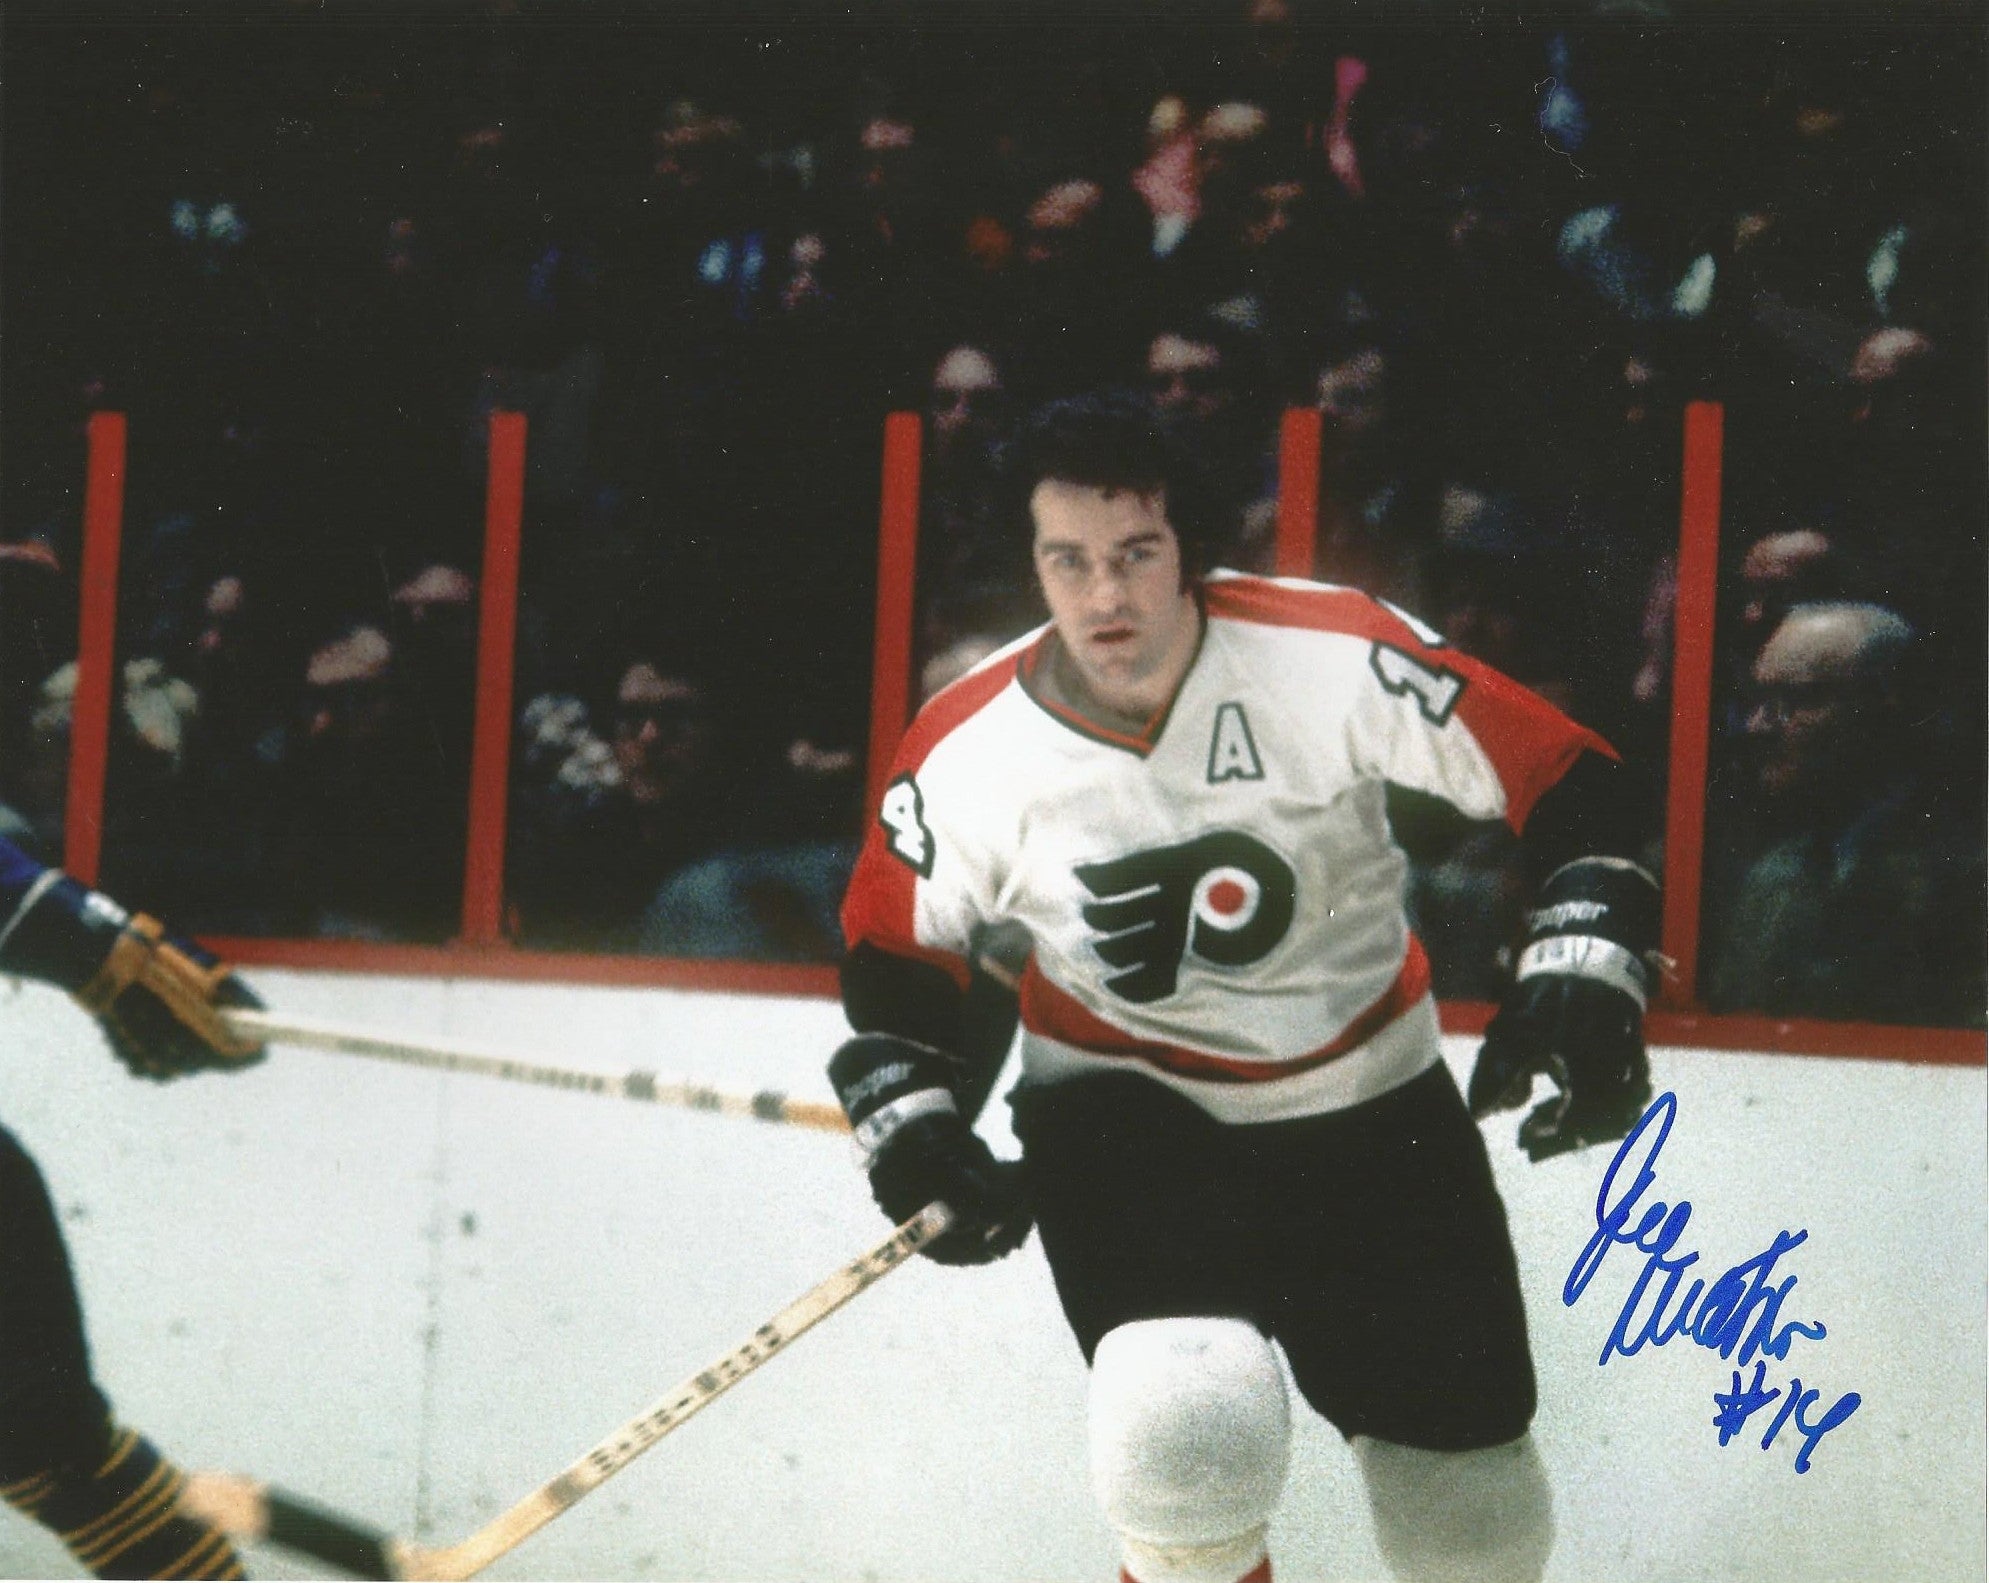 Flyers alumni games don't get old for Joe Watson: 'I love to play